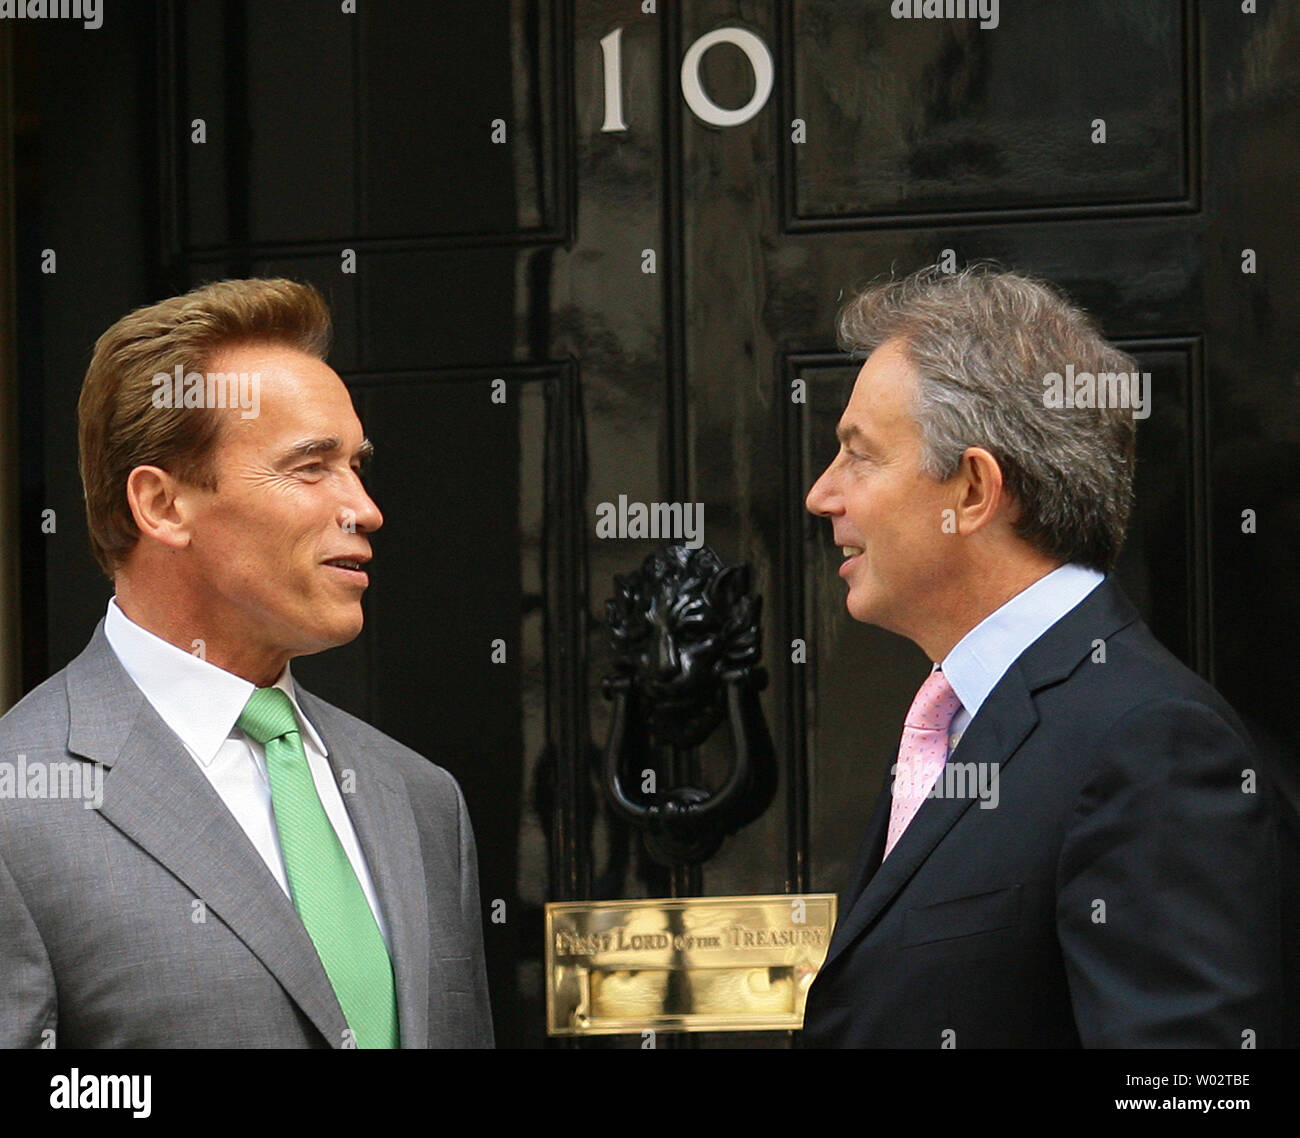 British Prime Minister Tony Blair (R) greets the Governor of California  Arnold Schwarzenegger (L) on the doorstep of No.10 Downing Street, where  they are discussing climate concerns, on June 26, 2007. It